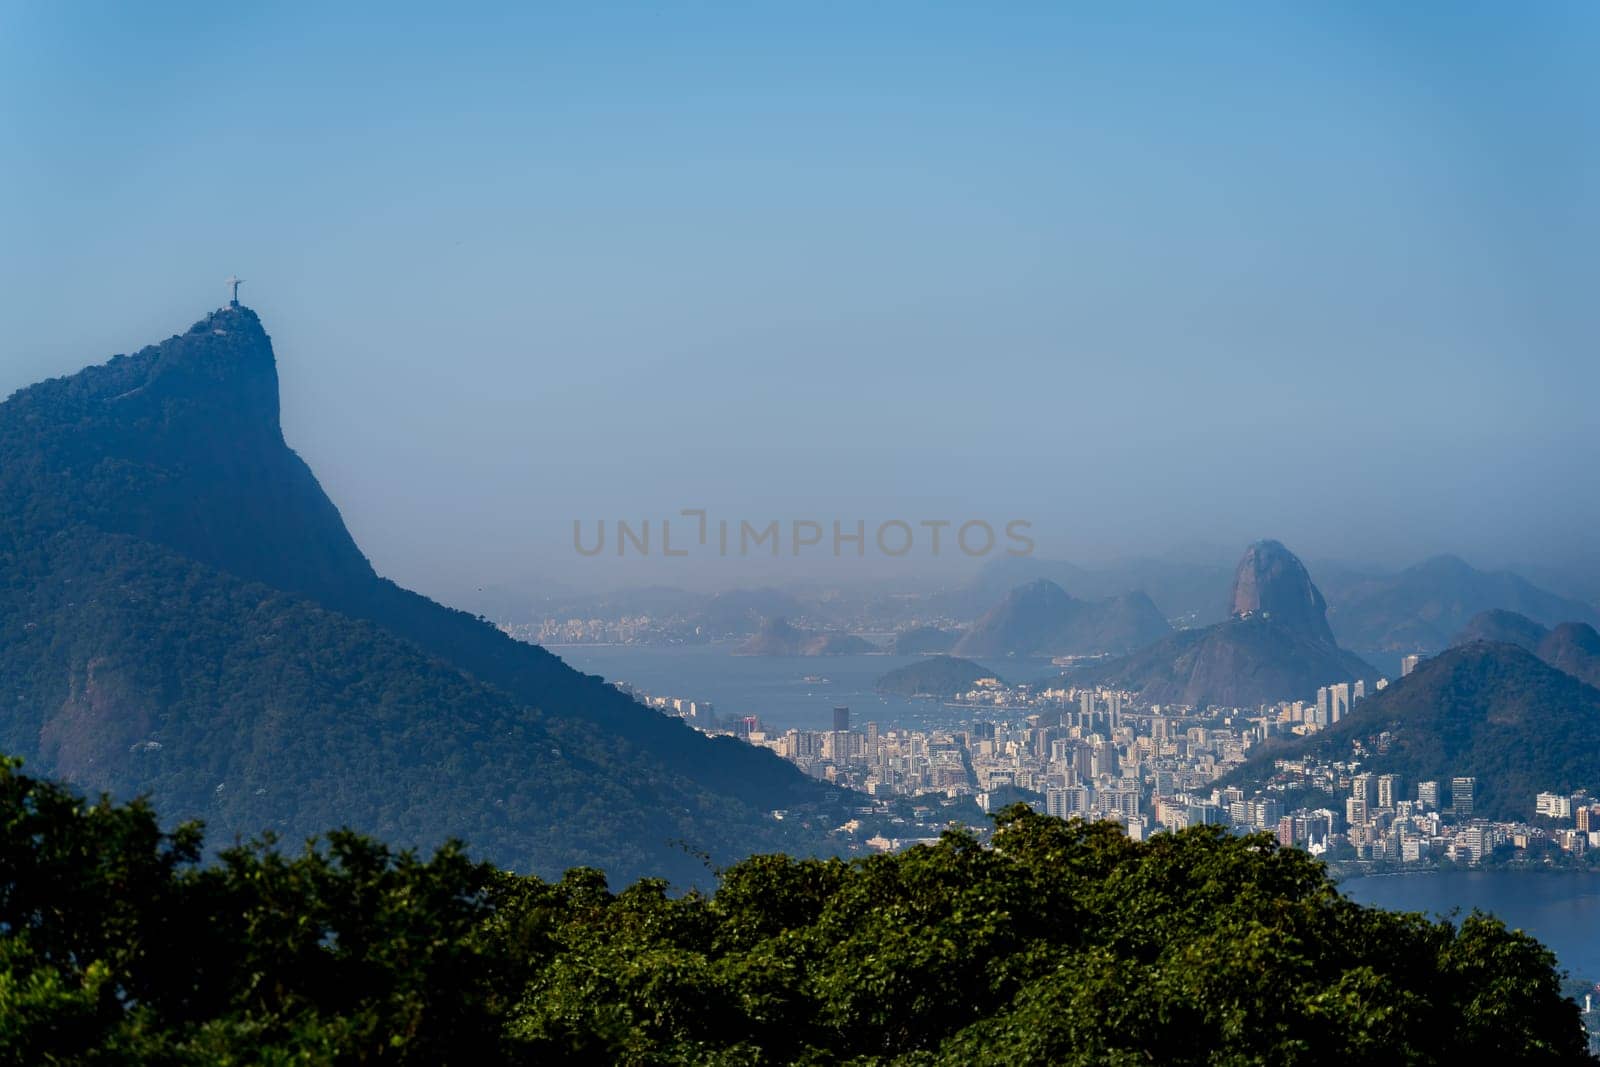 Overlooking Rio de Janeiro, the photo captures stunning Sugarloaf Mountain and the famed Christ the Redeemer.